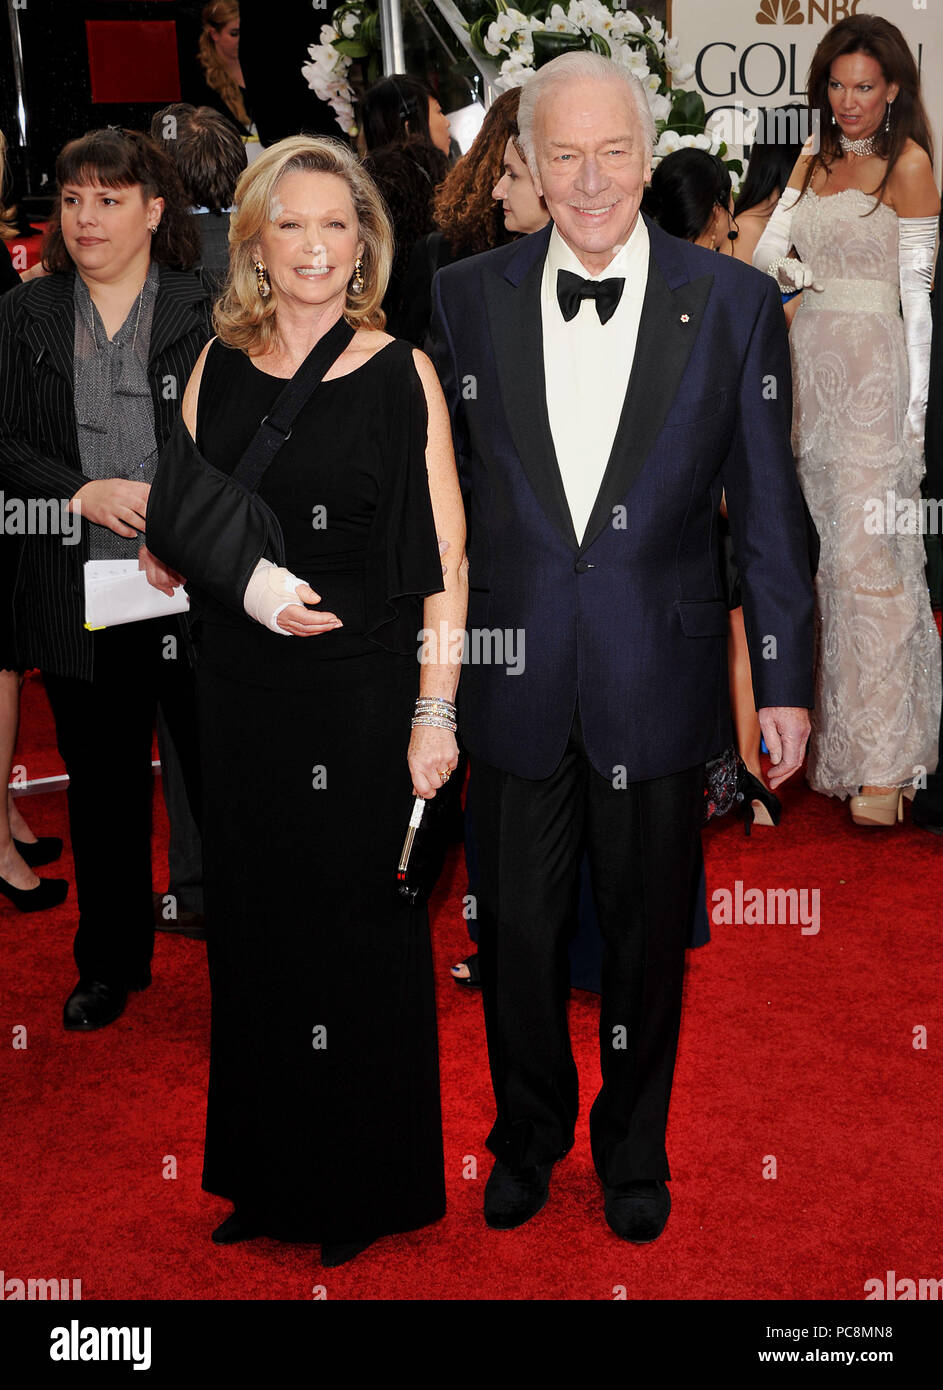 Christopher Plummer and wife   at The 2012 Golden Globe Awards at the Beverly Hilton Hotel In Beverly Hills, CAChristopher Plummer and wife  ------------- Red Carpet Event, Vertical, USA, Film Industry, Celebrities,  Photography, Bestof, Arts Culture and Entertainment, Topix Celebrities fashion /  Vertical, Best of, Event in Hollywood Life - California,  Red Carpet and backstage, USA, Film Industry, Celebrities,  movie celebrities, TV celebrities, Music celebrities, Photography, Bestof, Arts Culture and Entertainment,  Topix, vertical,  family from from the year , 2012, inquiry tsuni@Gamma-USA Stock Photo